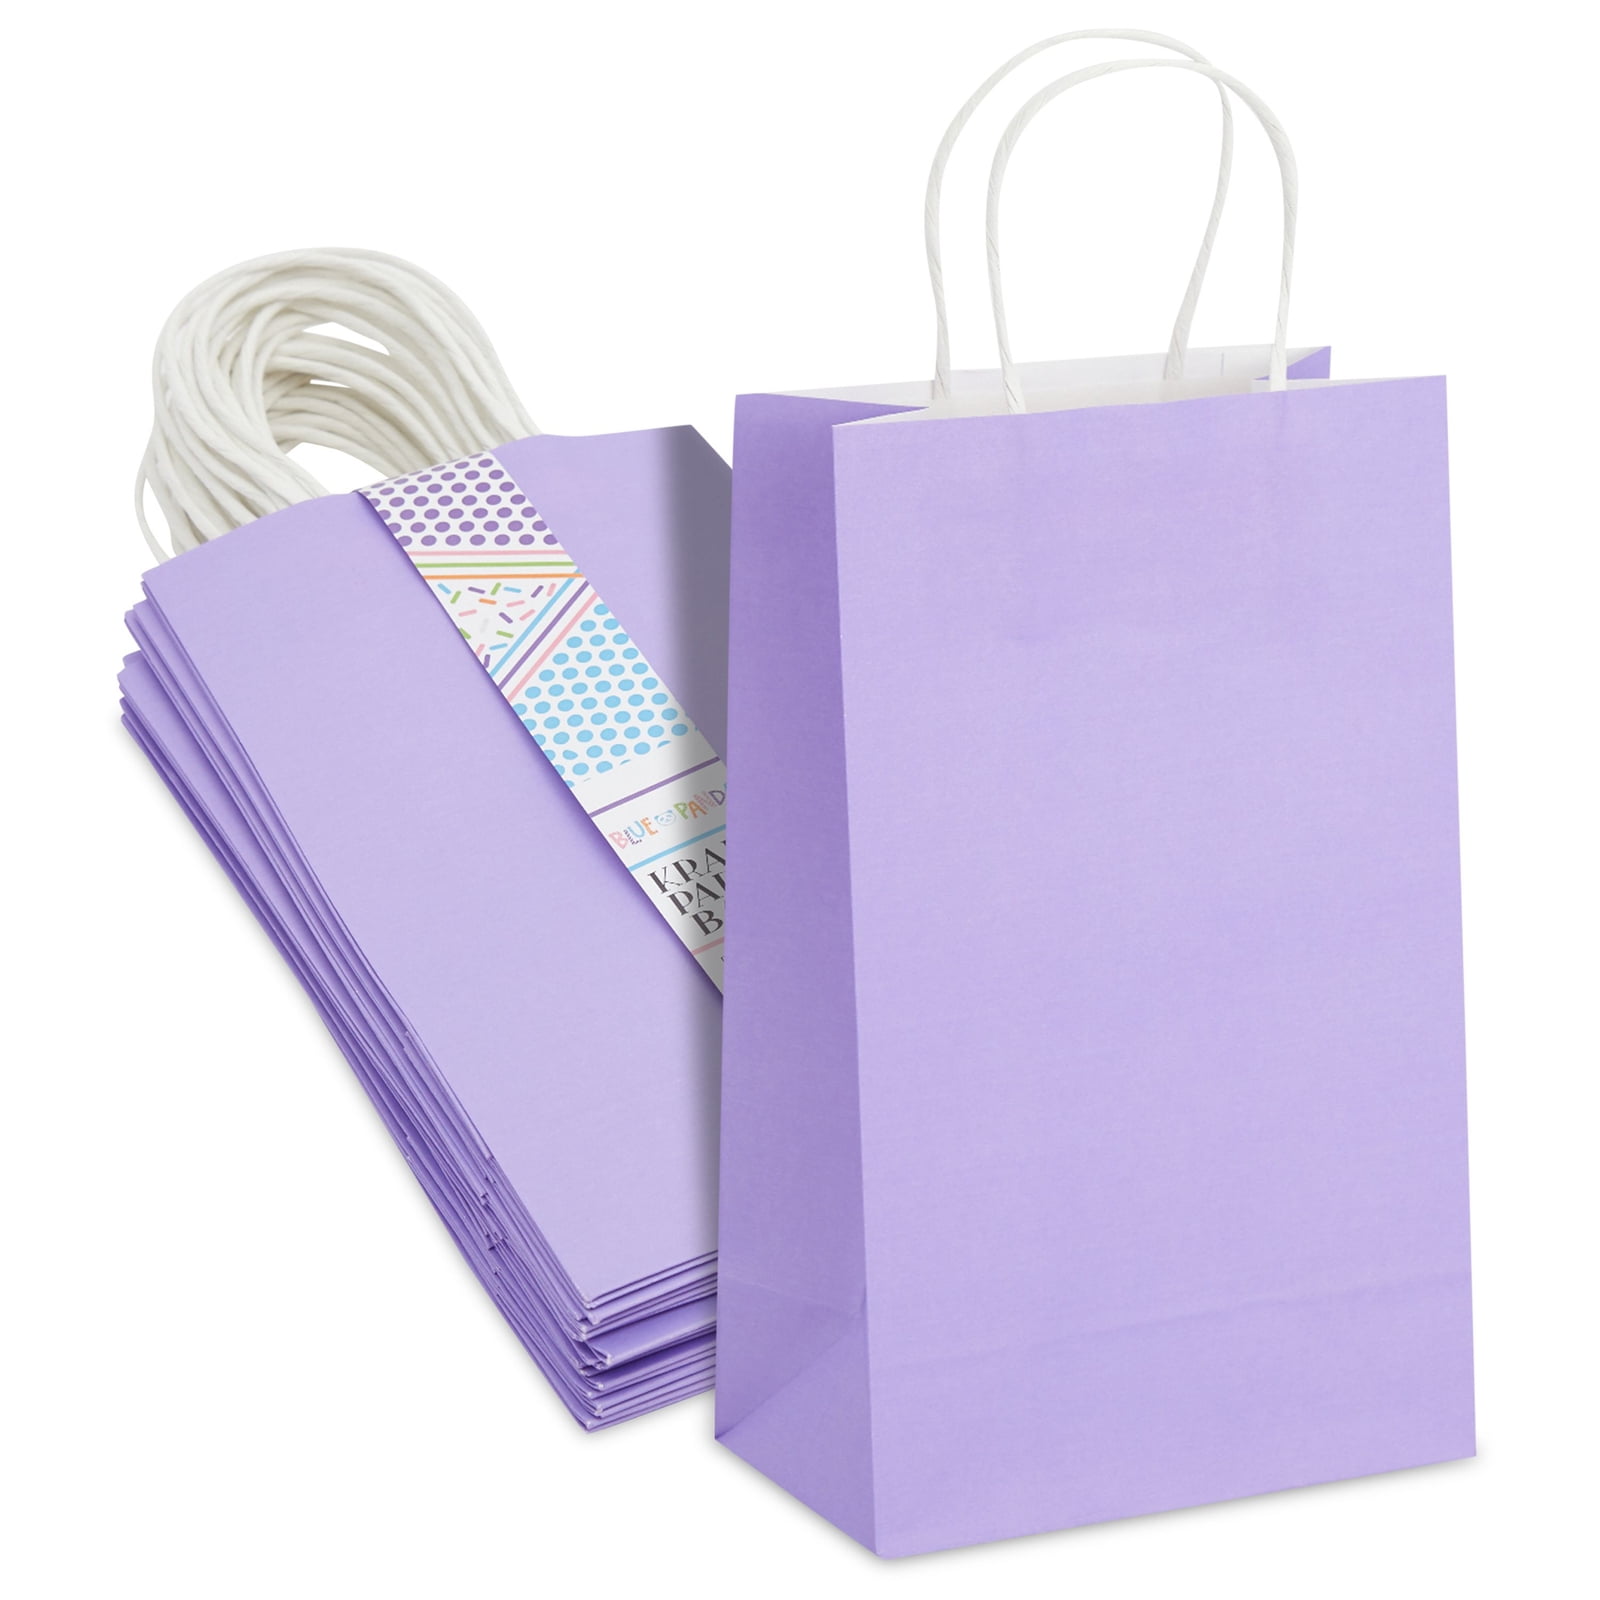 Size 20 x 18 x 8 Lilac Party Paper Carrier Bags with Twisted Paper Handles